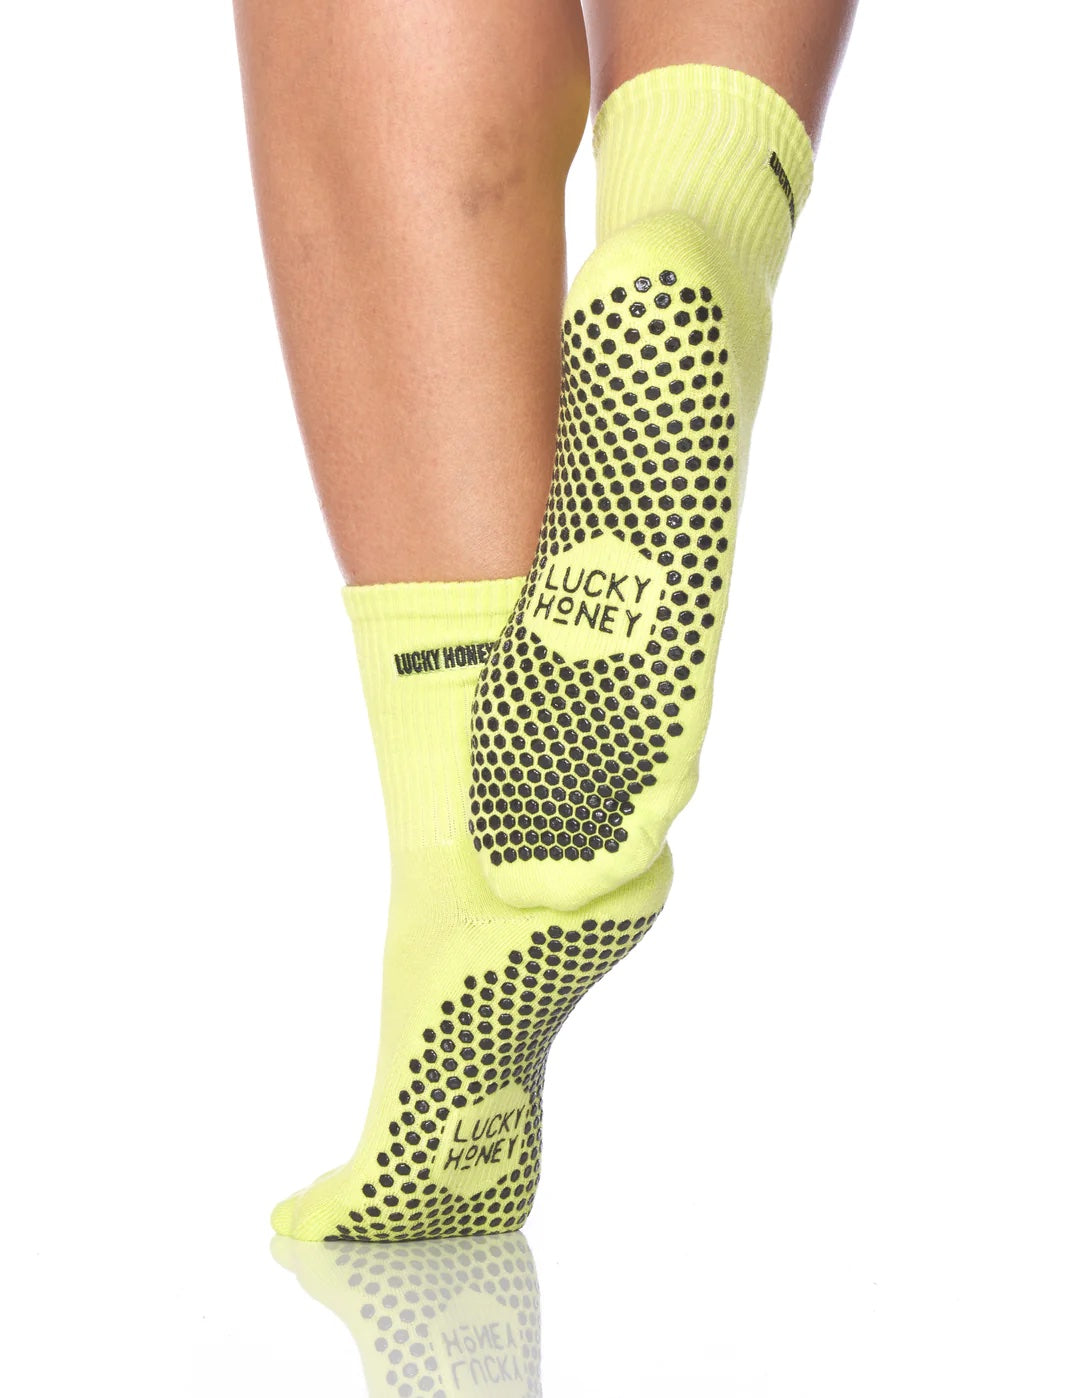 The Core Grip Sock - Lucky Honey - simplyWORKOUT